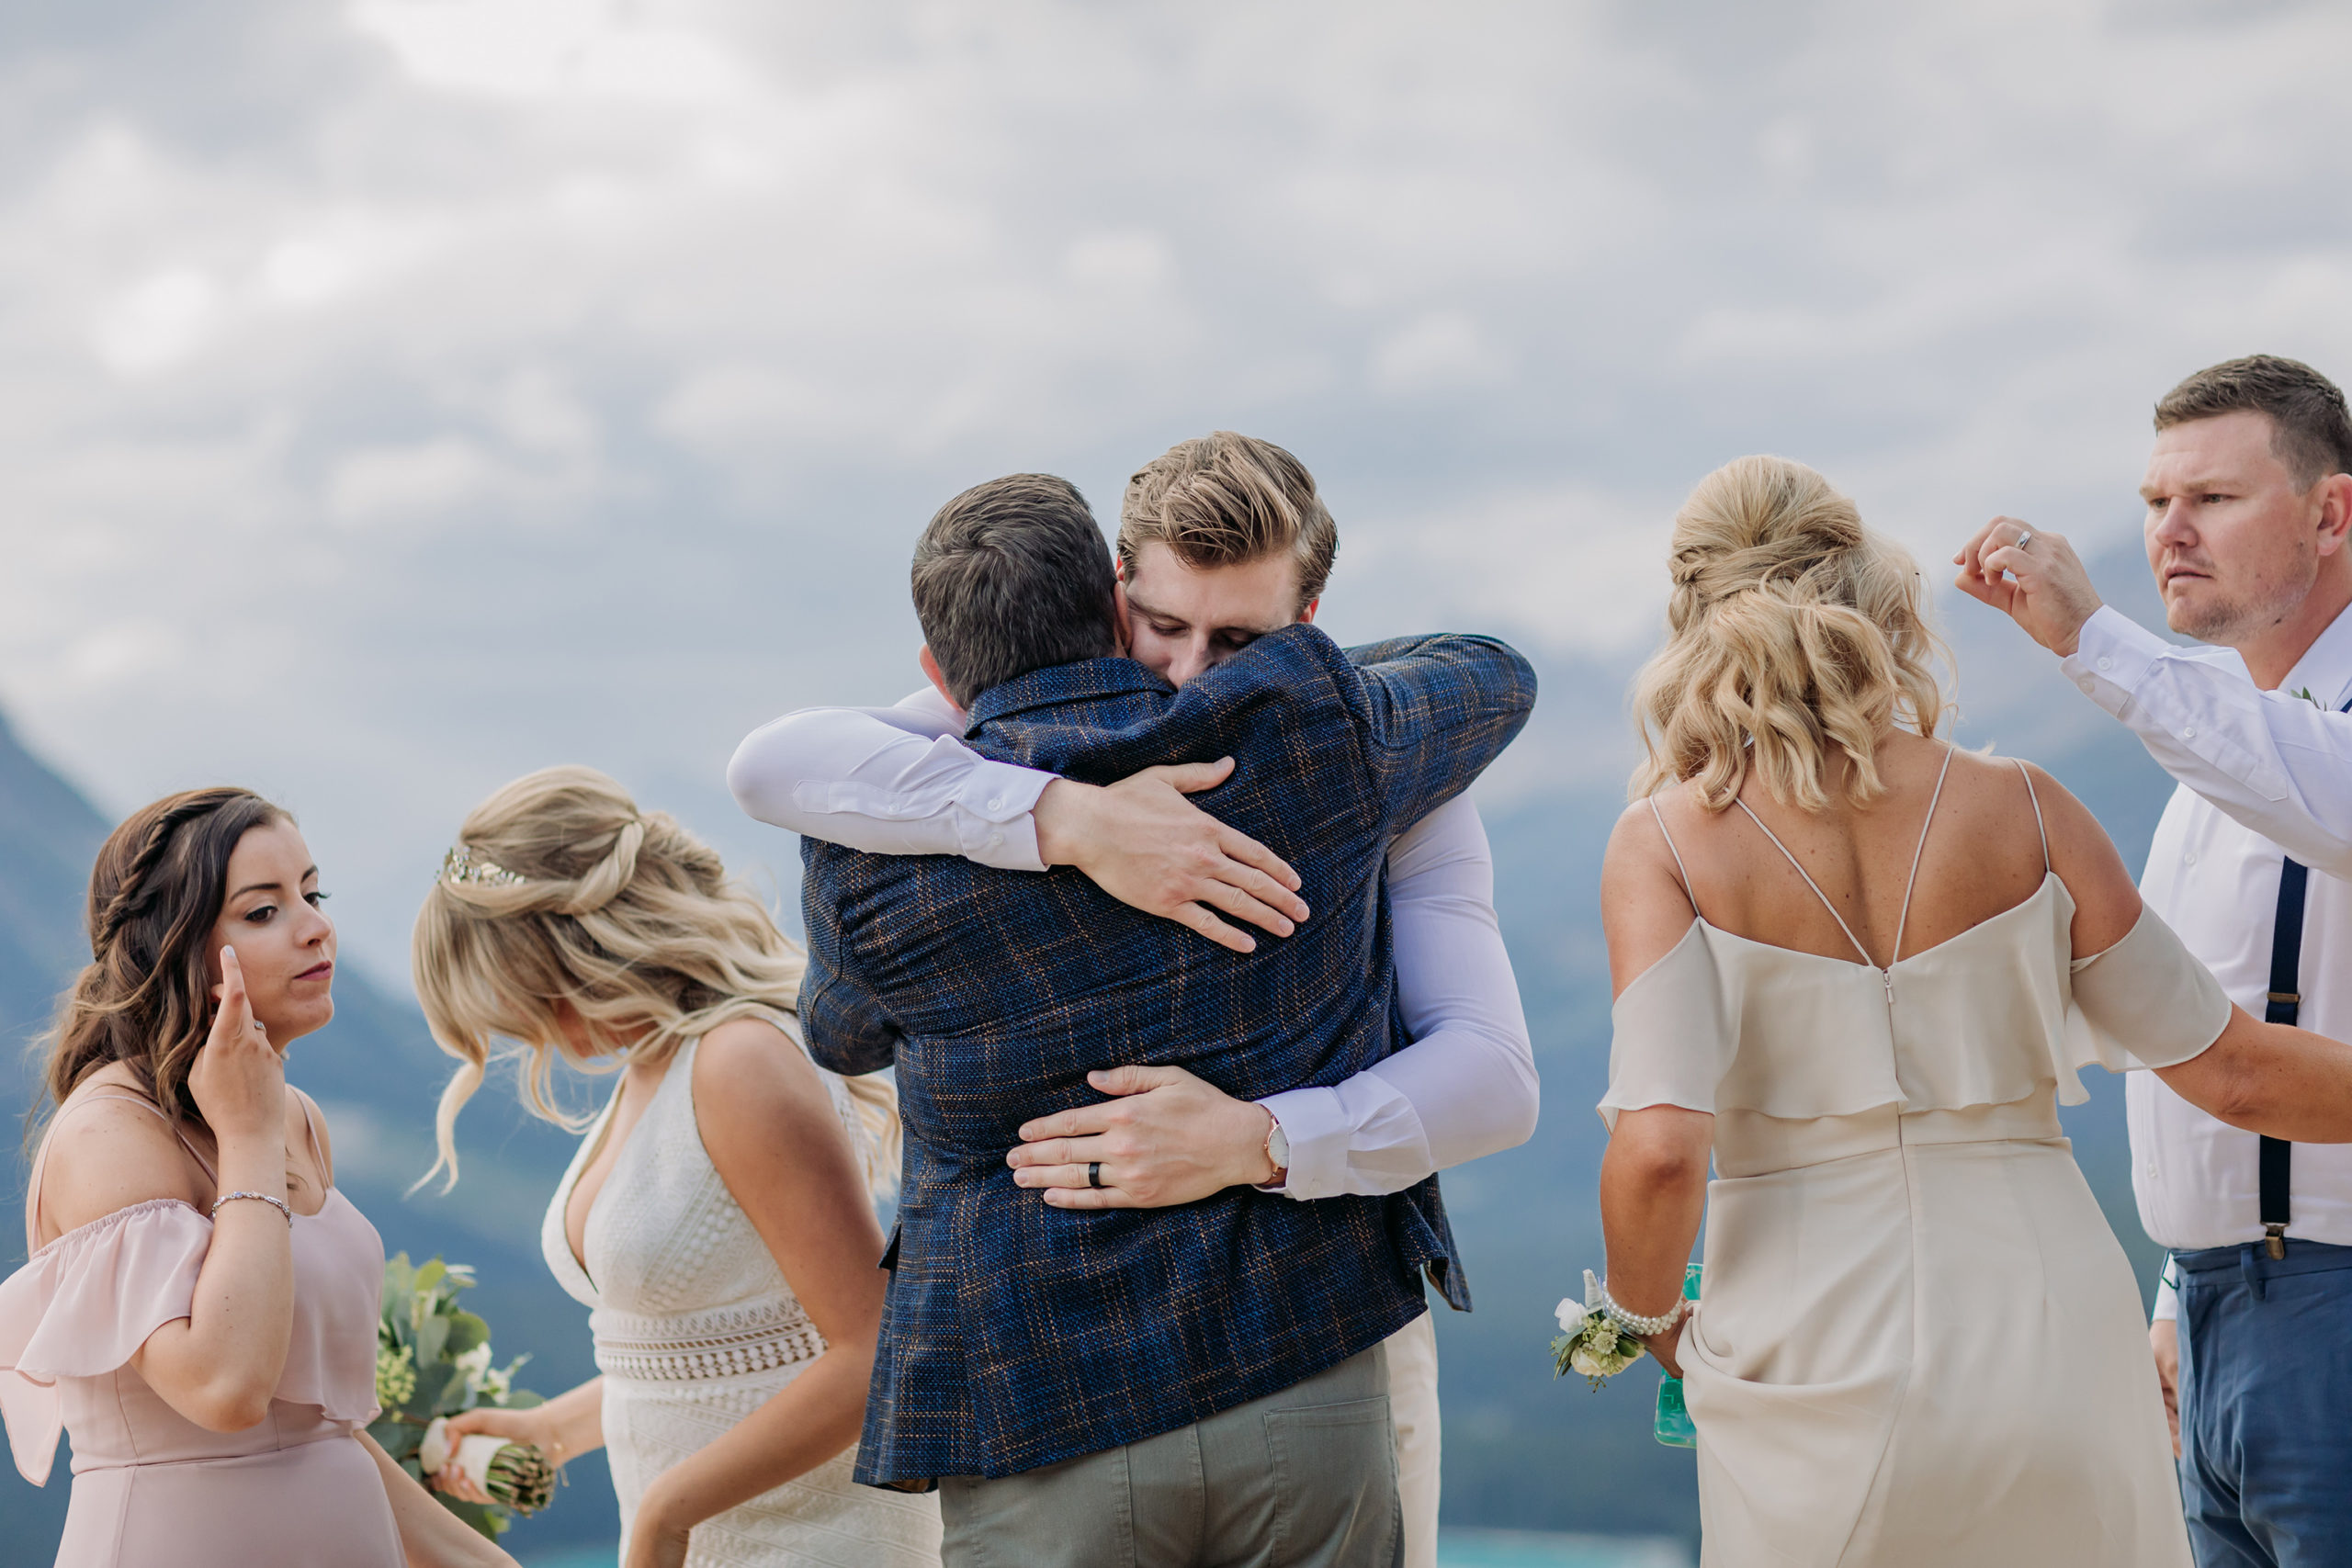 Peyto Lake Intimate wedding ceremony on Icefields Parkway surrounded by Mountains overlooking blue mountain Lake in the summer photographed my ENV Photography